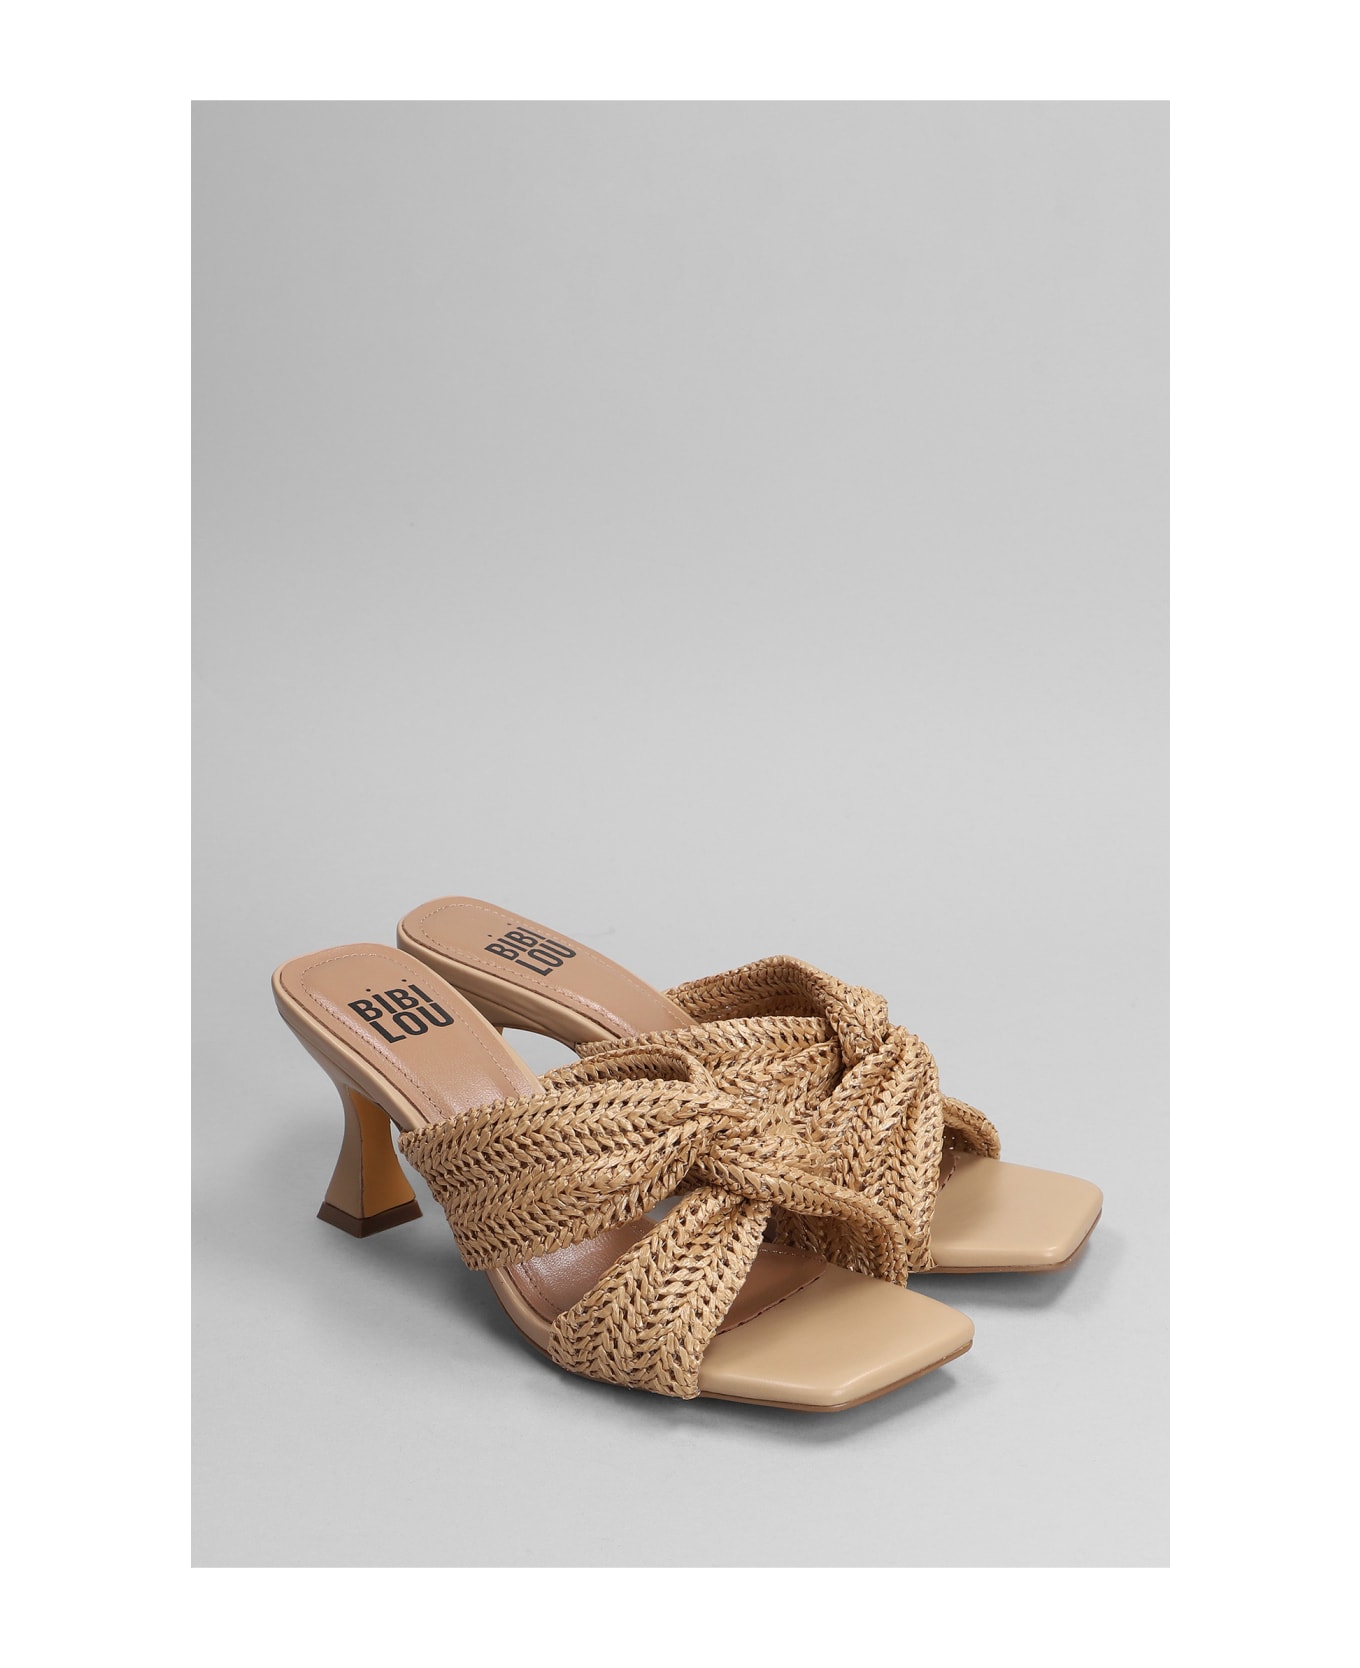 Bibi Lou Sandals In Leather Color Synthetic Fibers - leather color